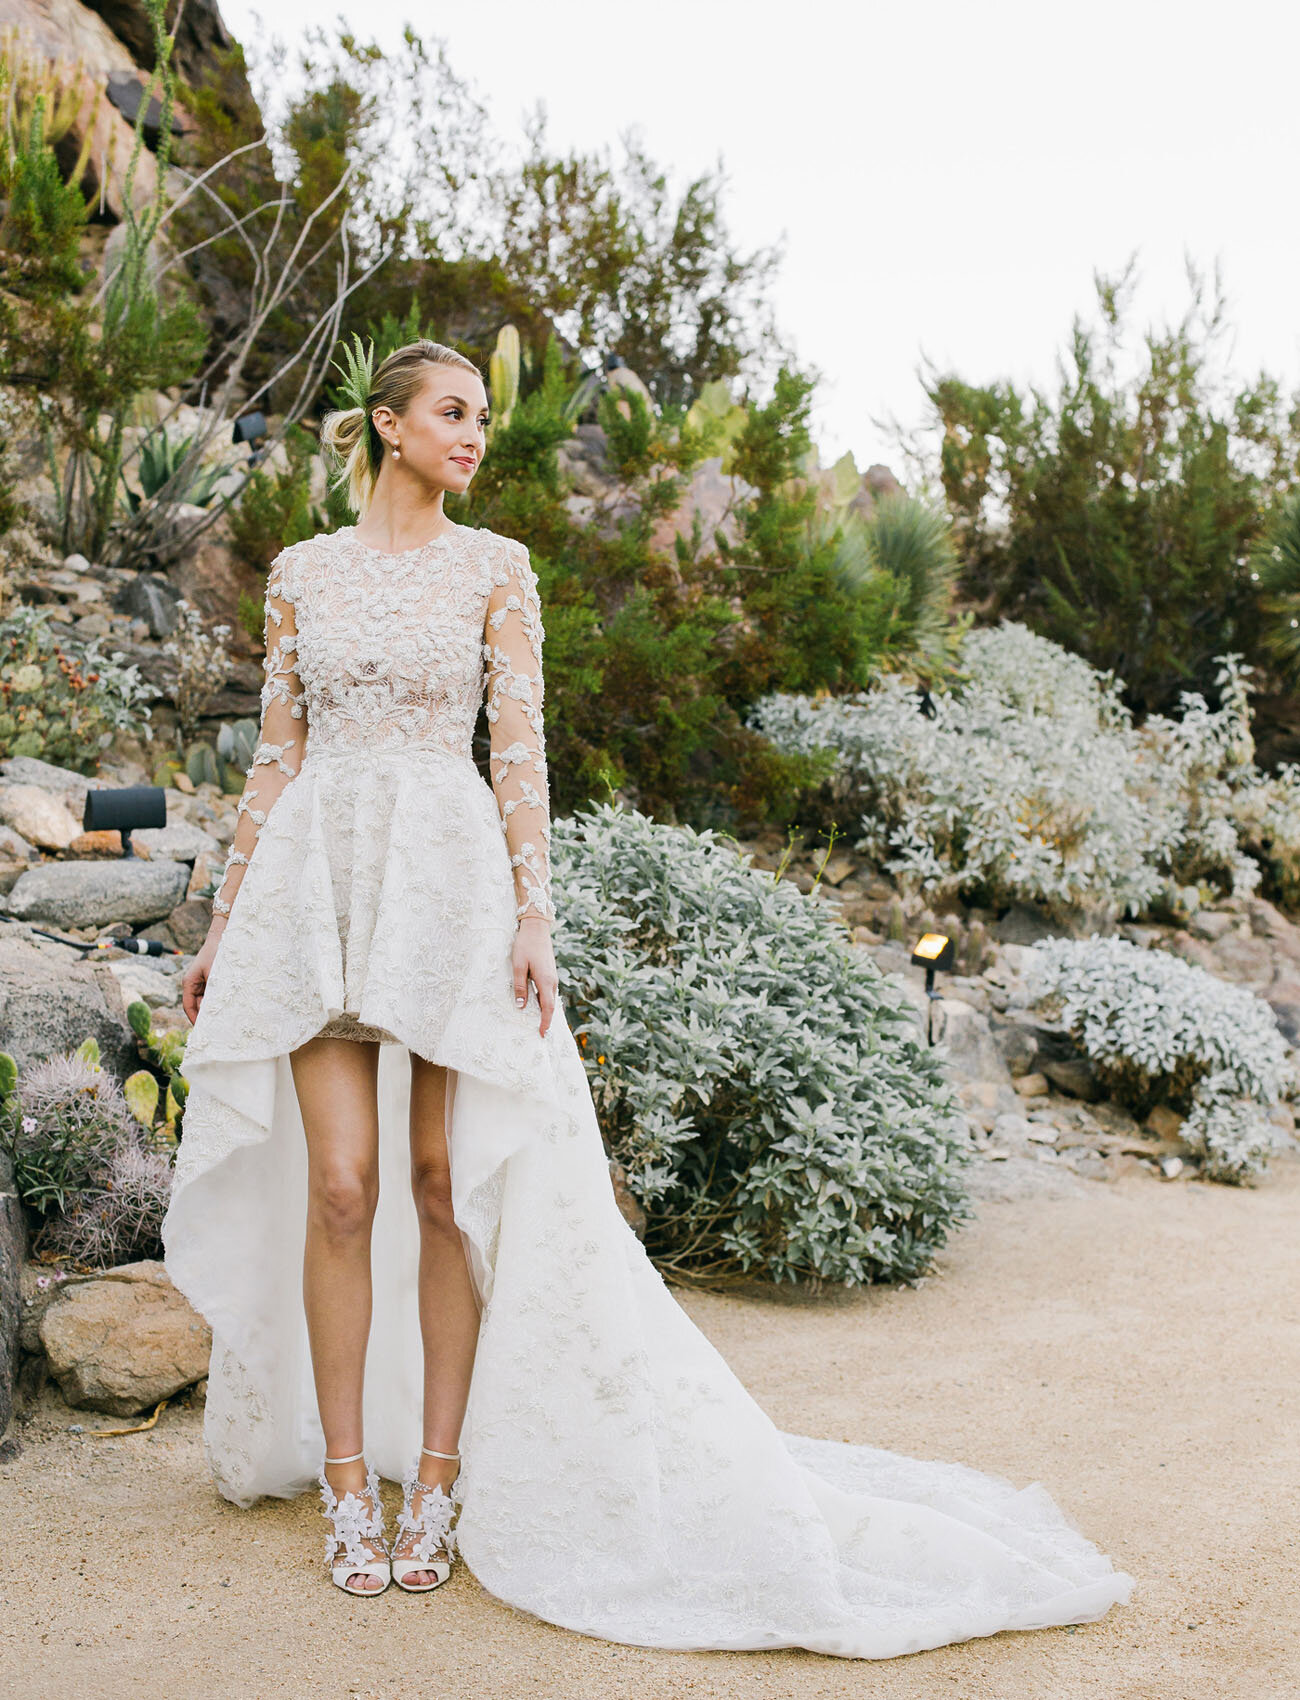 20 Outstanding and Iconic Celebrity Wedding Dresses - Bridestory Blog